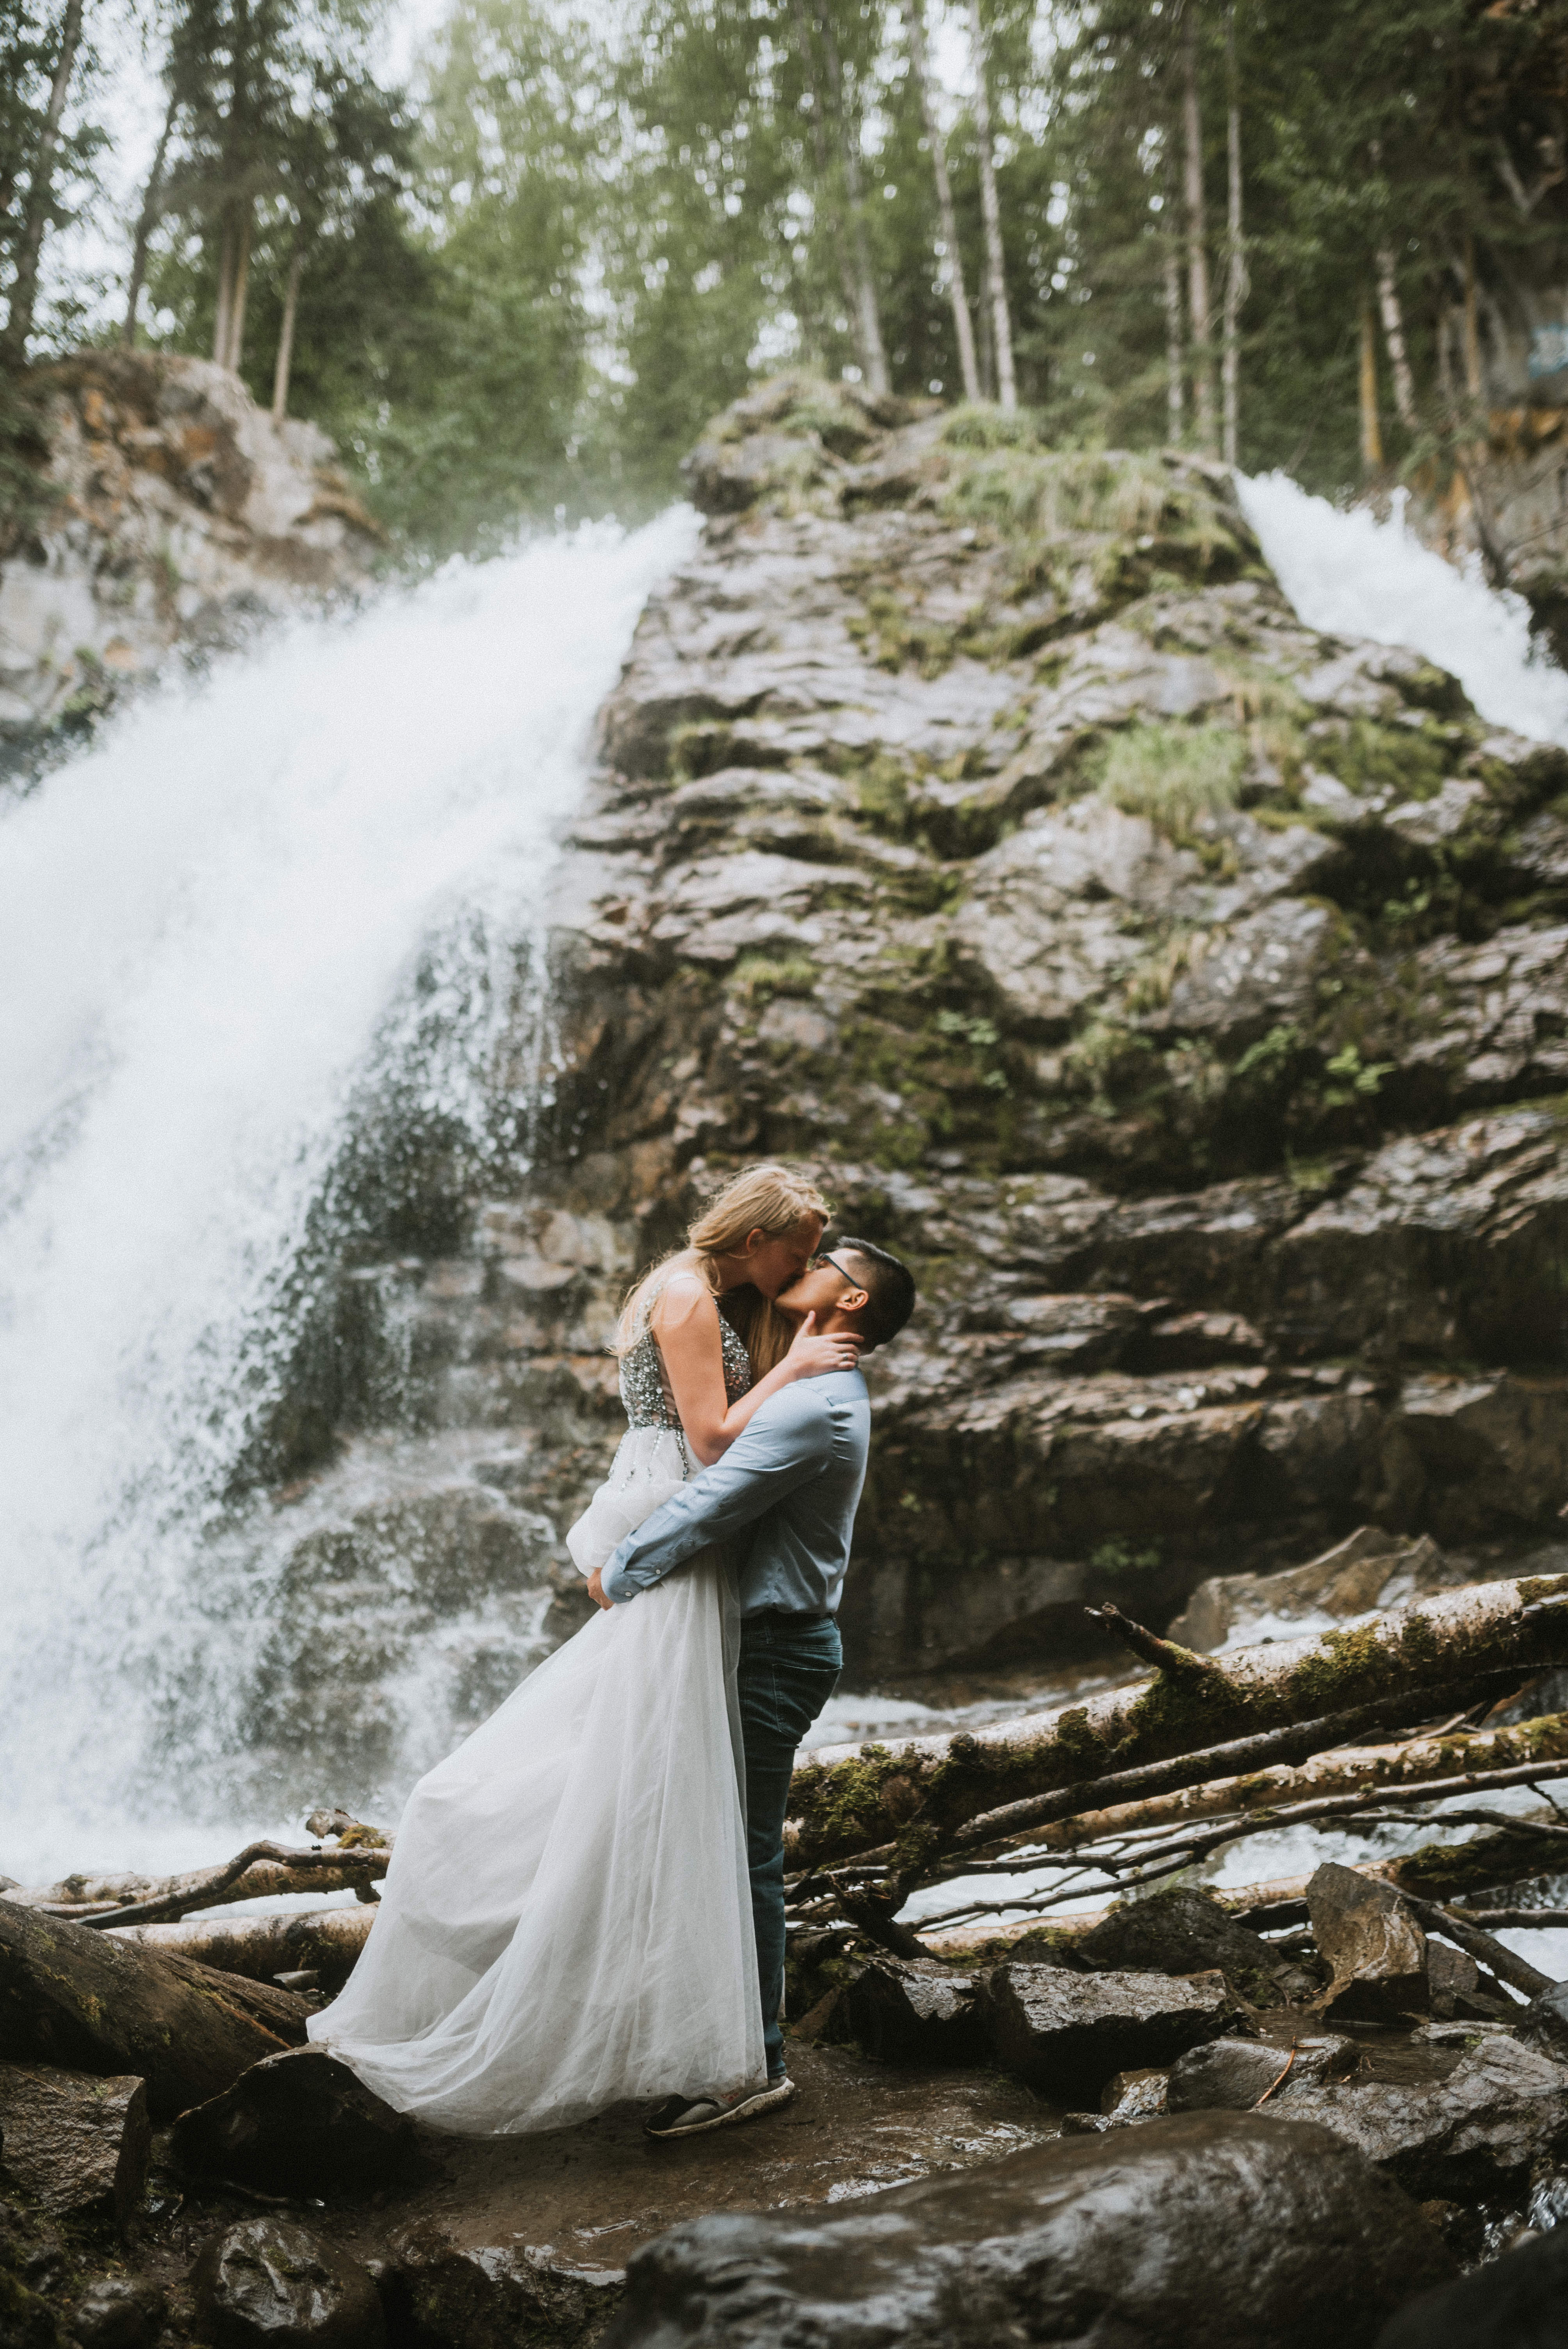 Couple dressed up and kissing in front of Barbara Falls during their Engagement Photos in Alaska